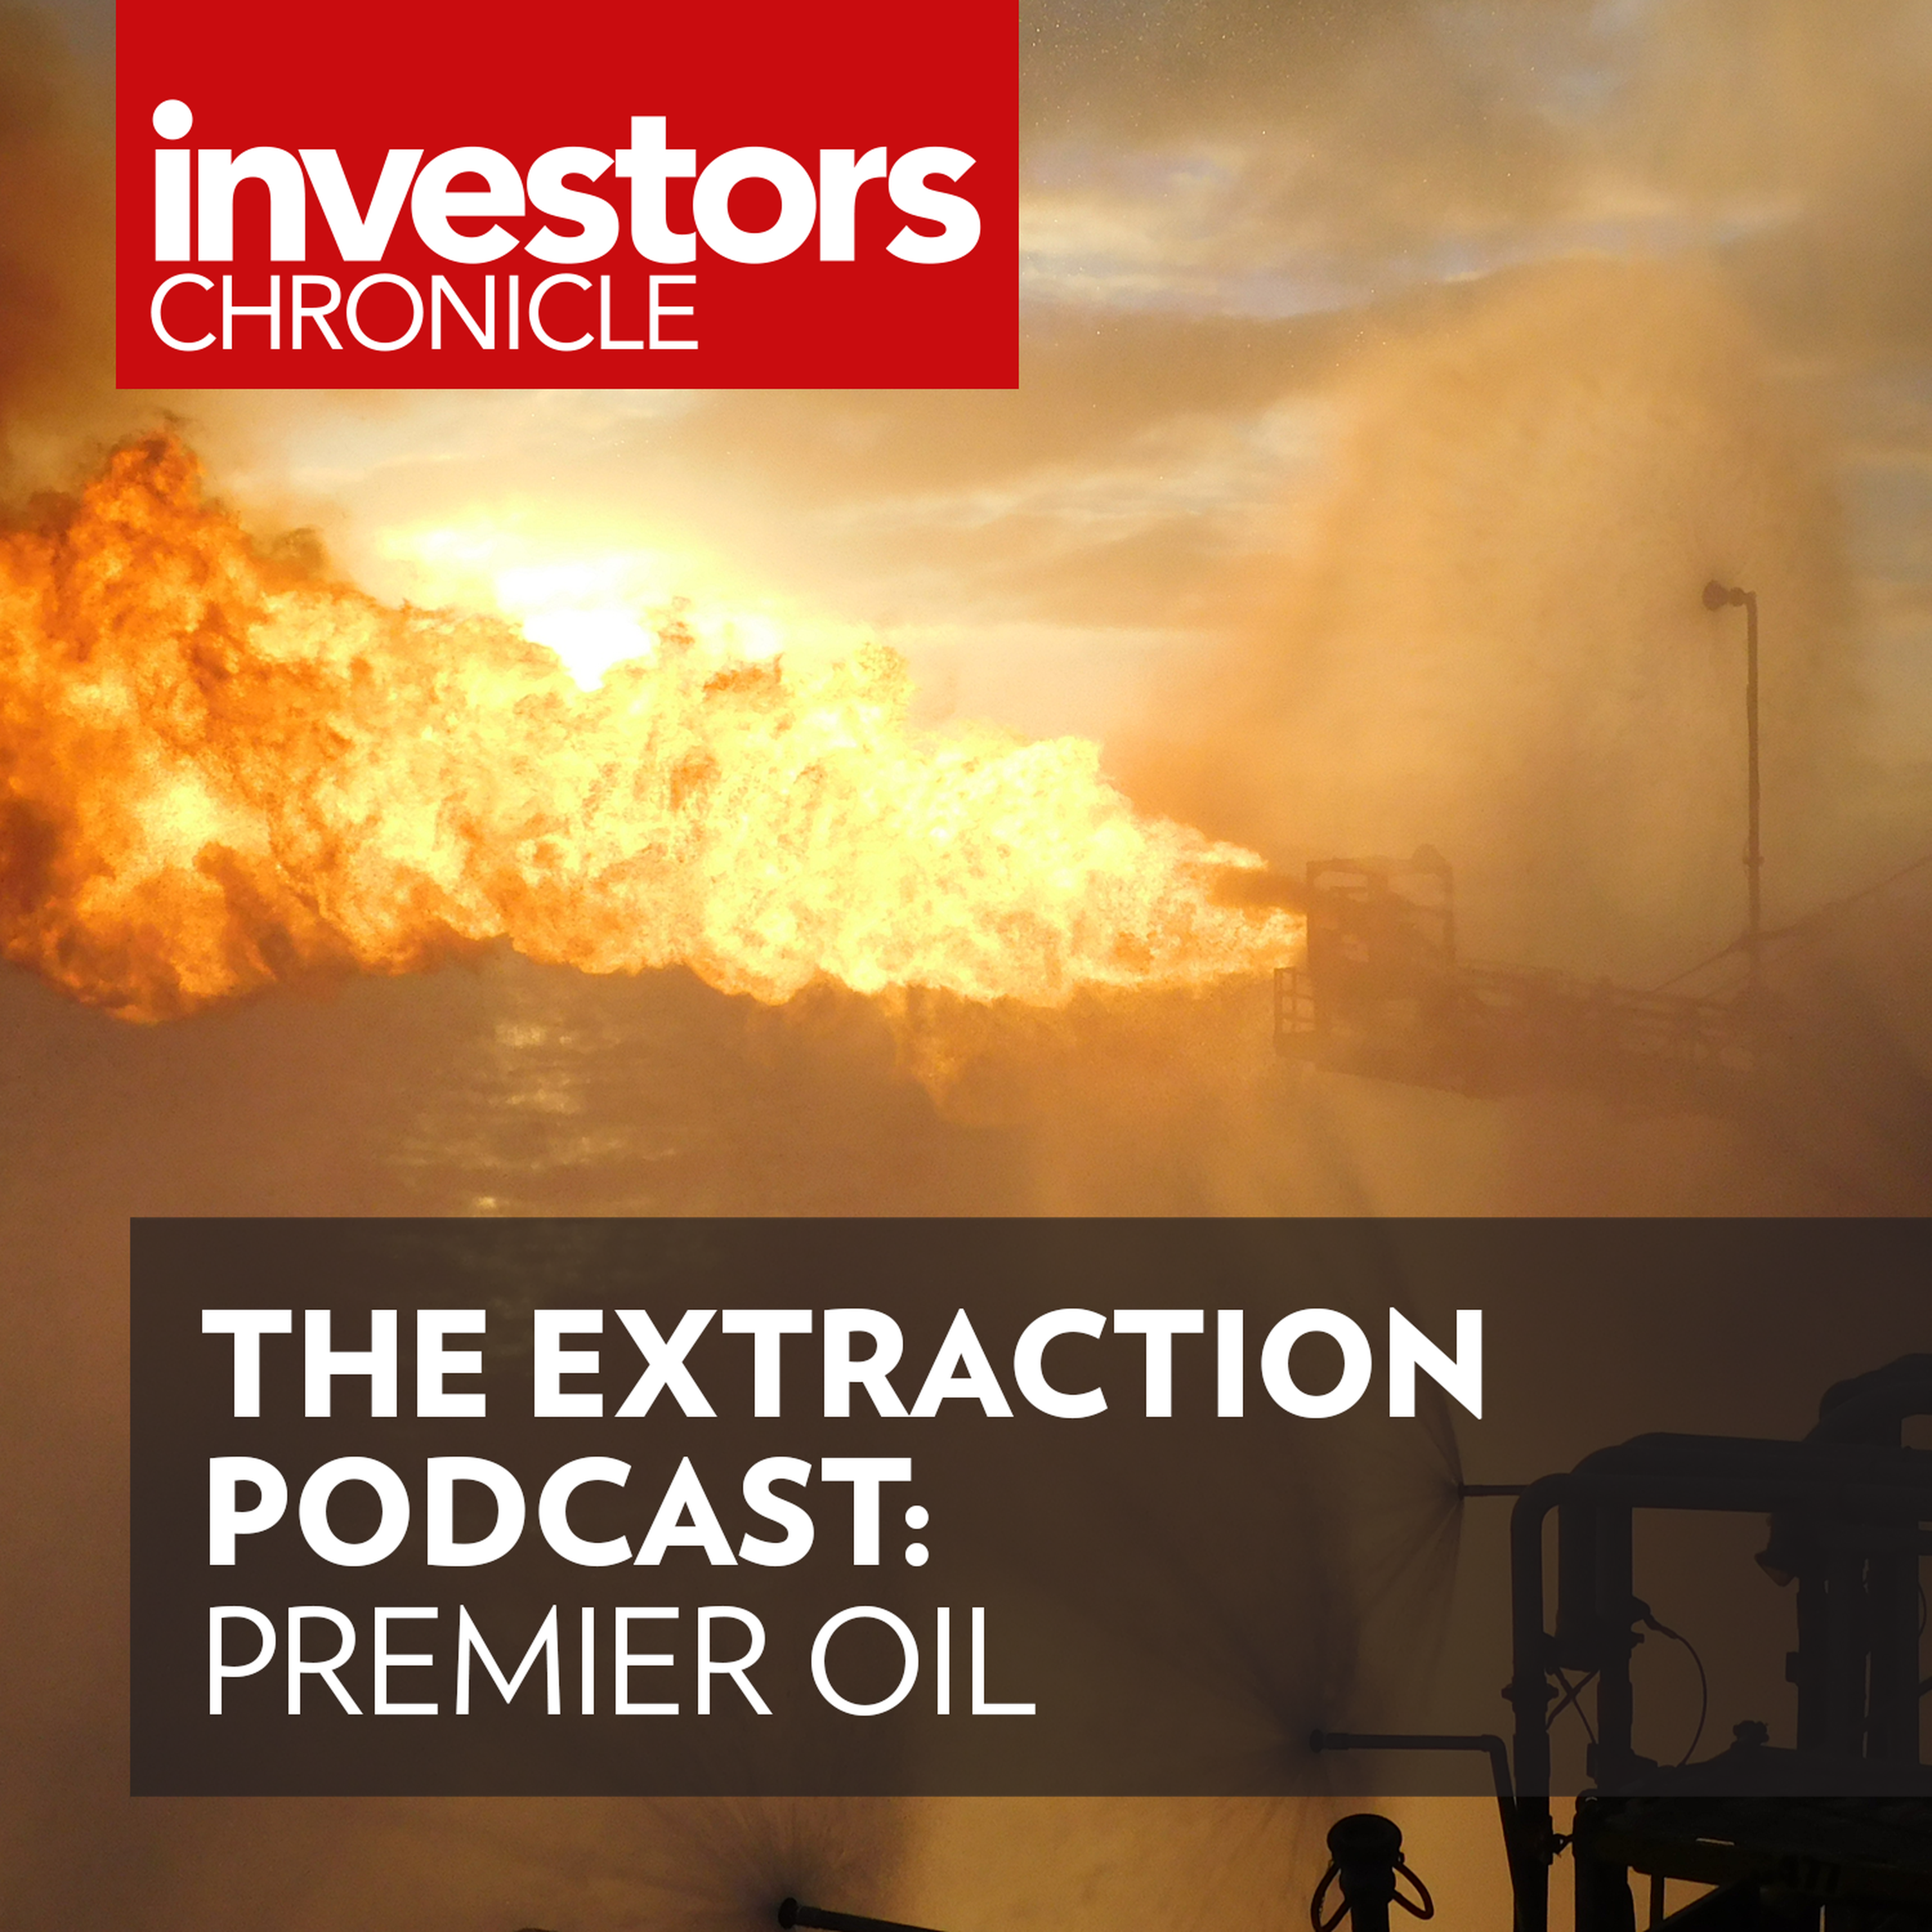 The Extraction Podcast: Premier Oil